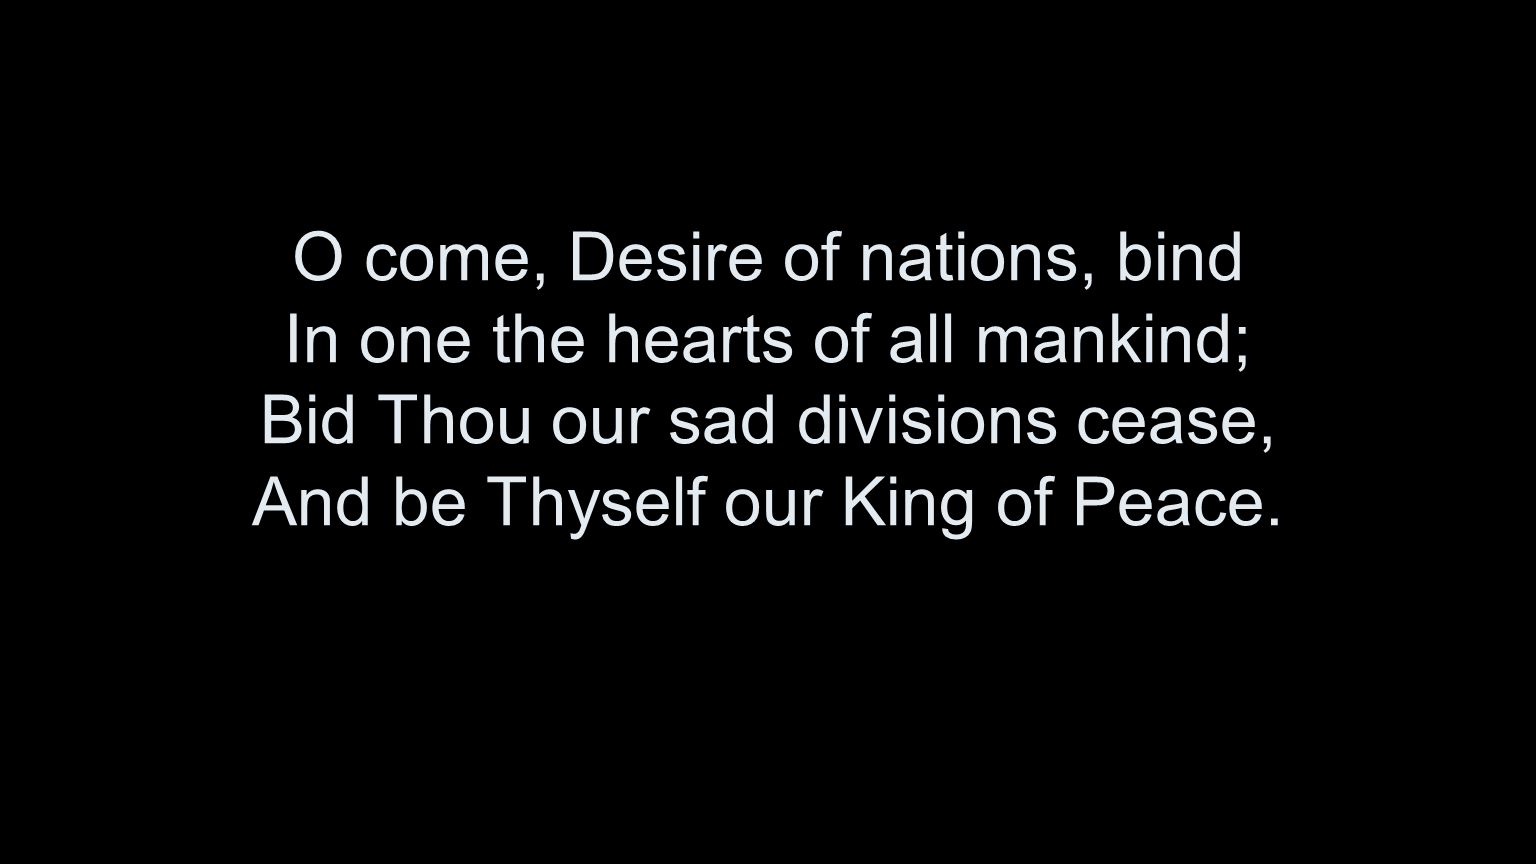 O come, Desire of nations, bind In one the hearts of all mankind; Bid Thou our sad divisions cease, And be Thyself our King of Peace.